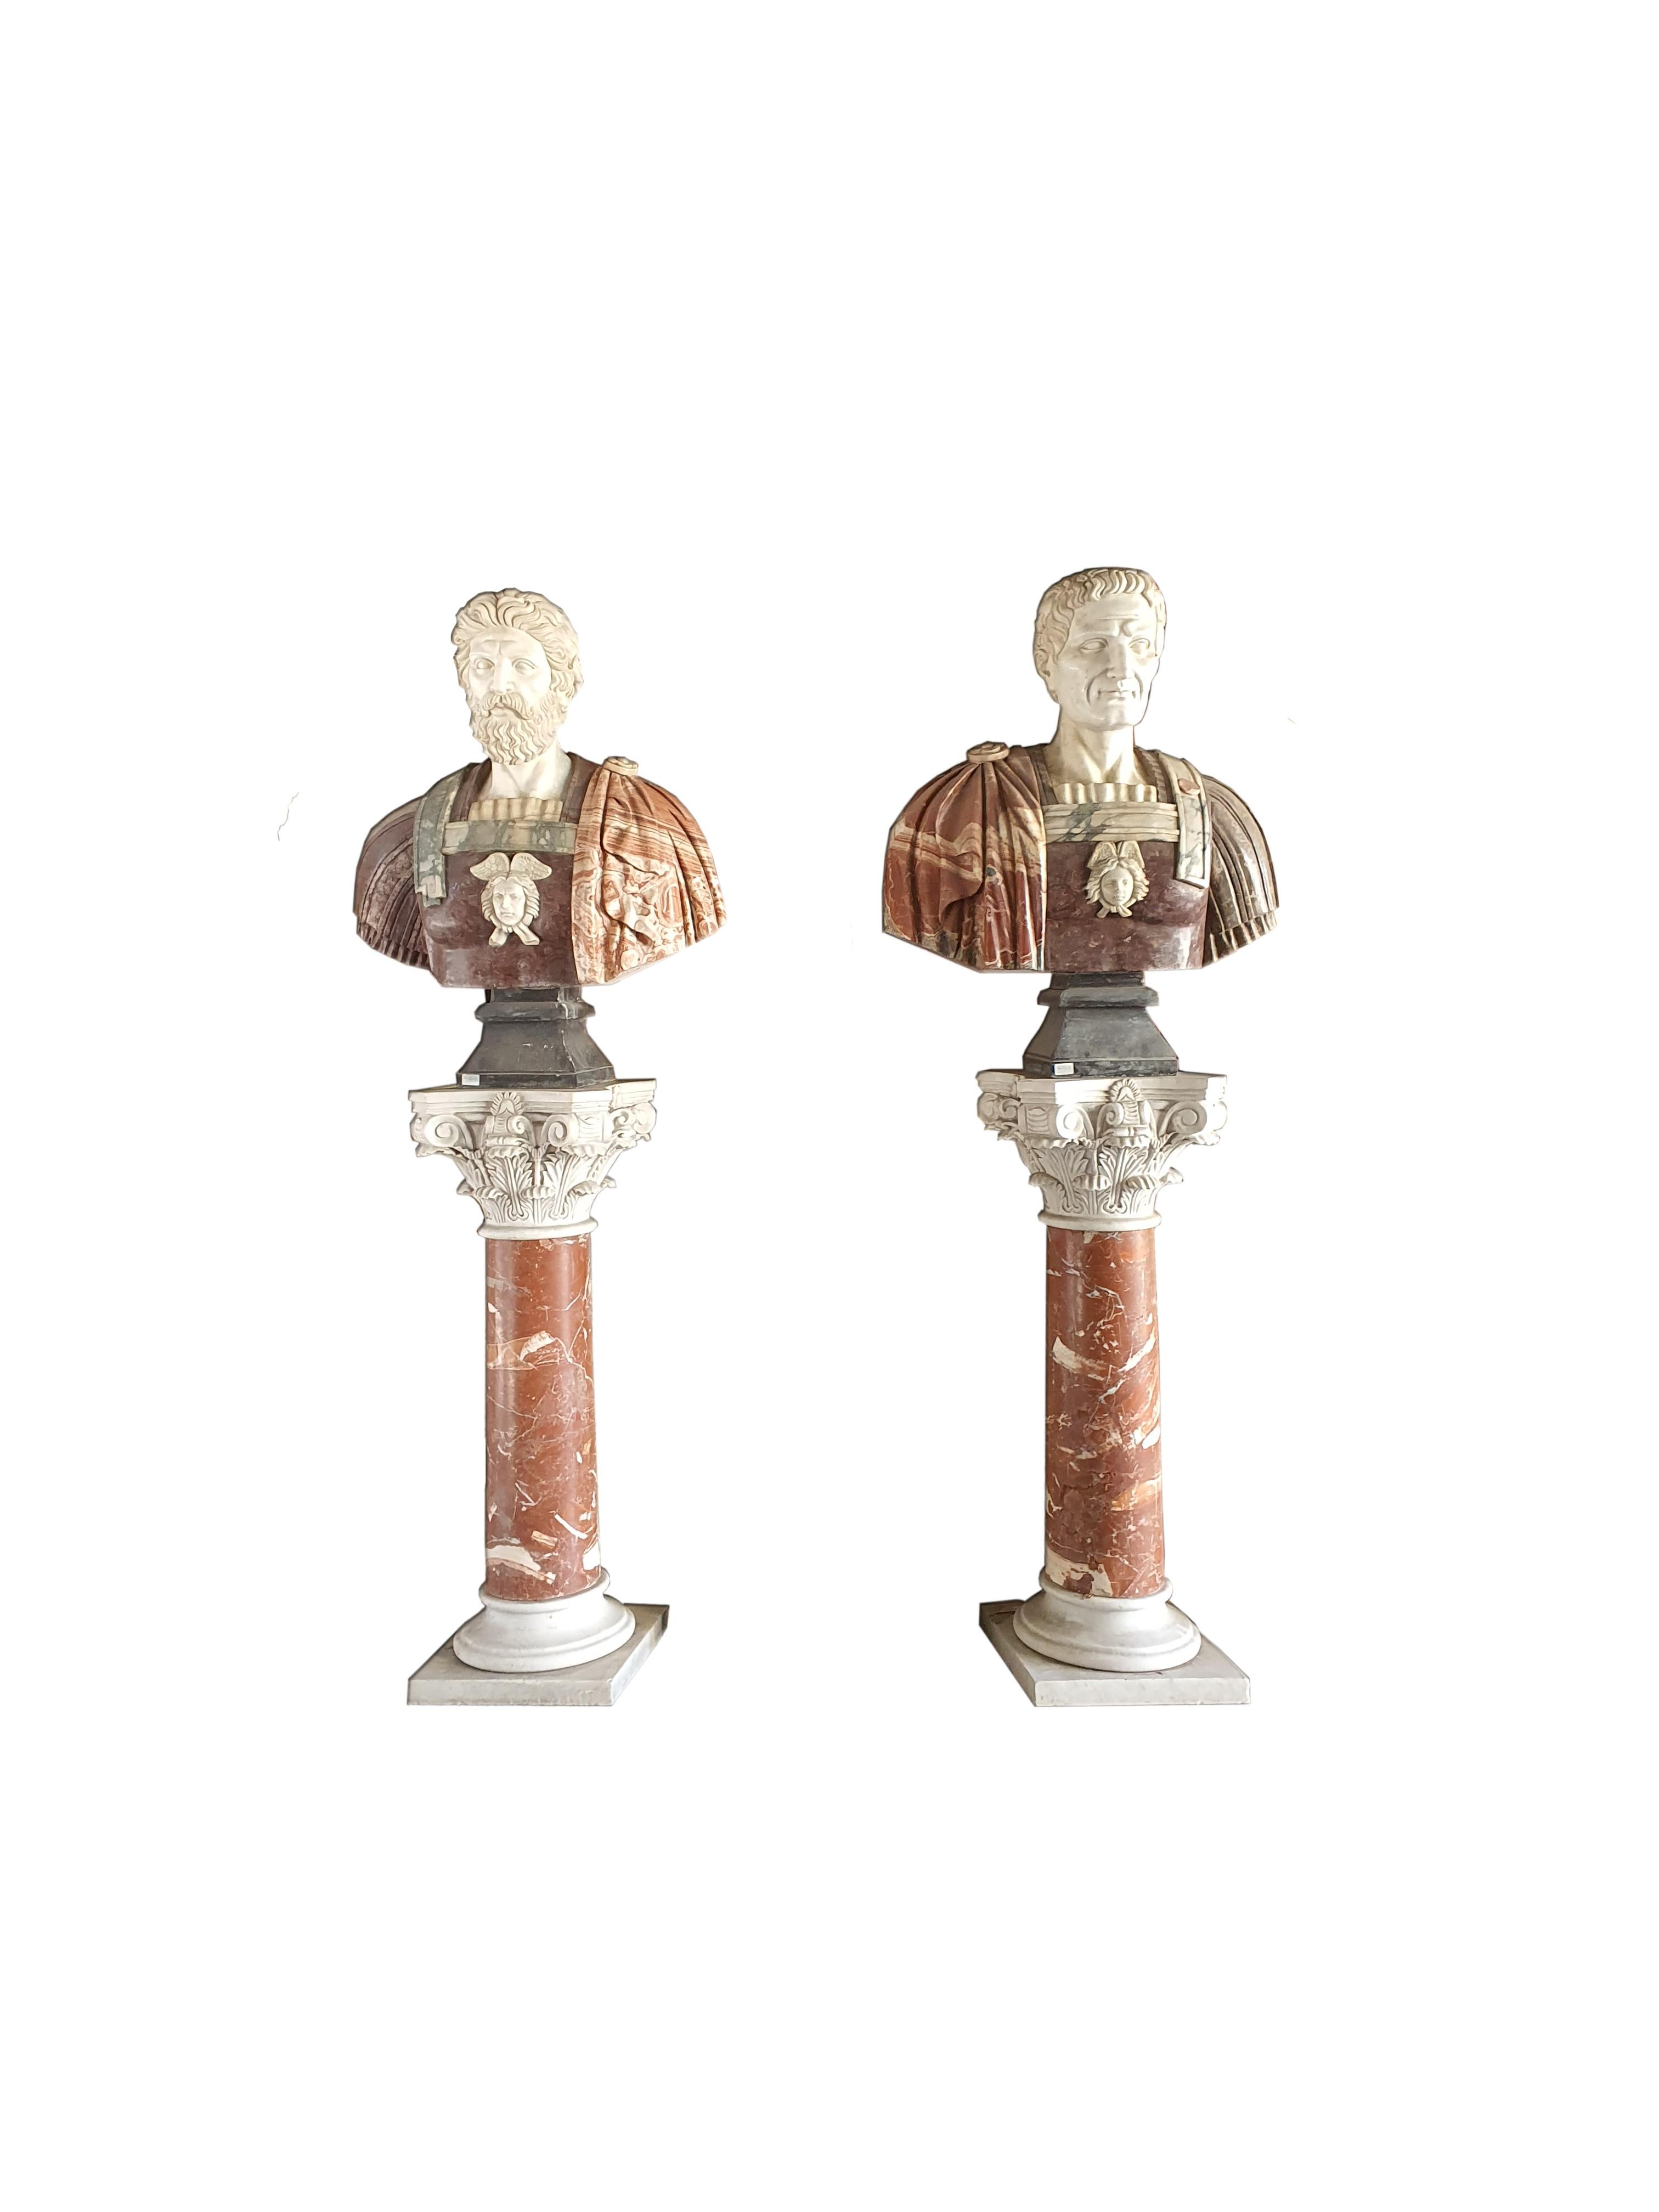 Pair of marble busts, depicting Roman emperors. The busts are made of white statuary marble and Breccia marble, and rest on two marble columns.